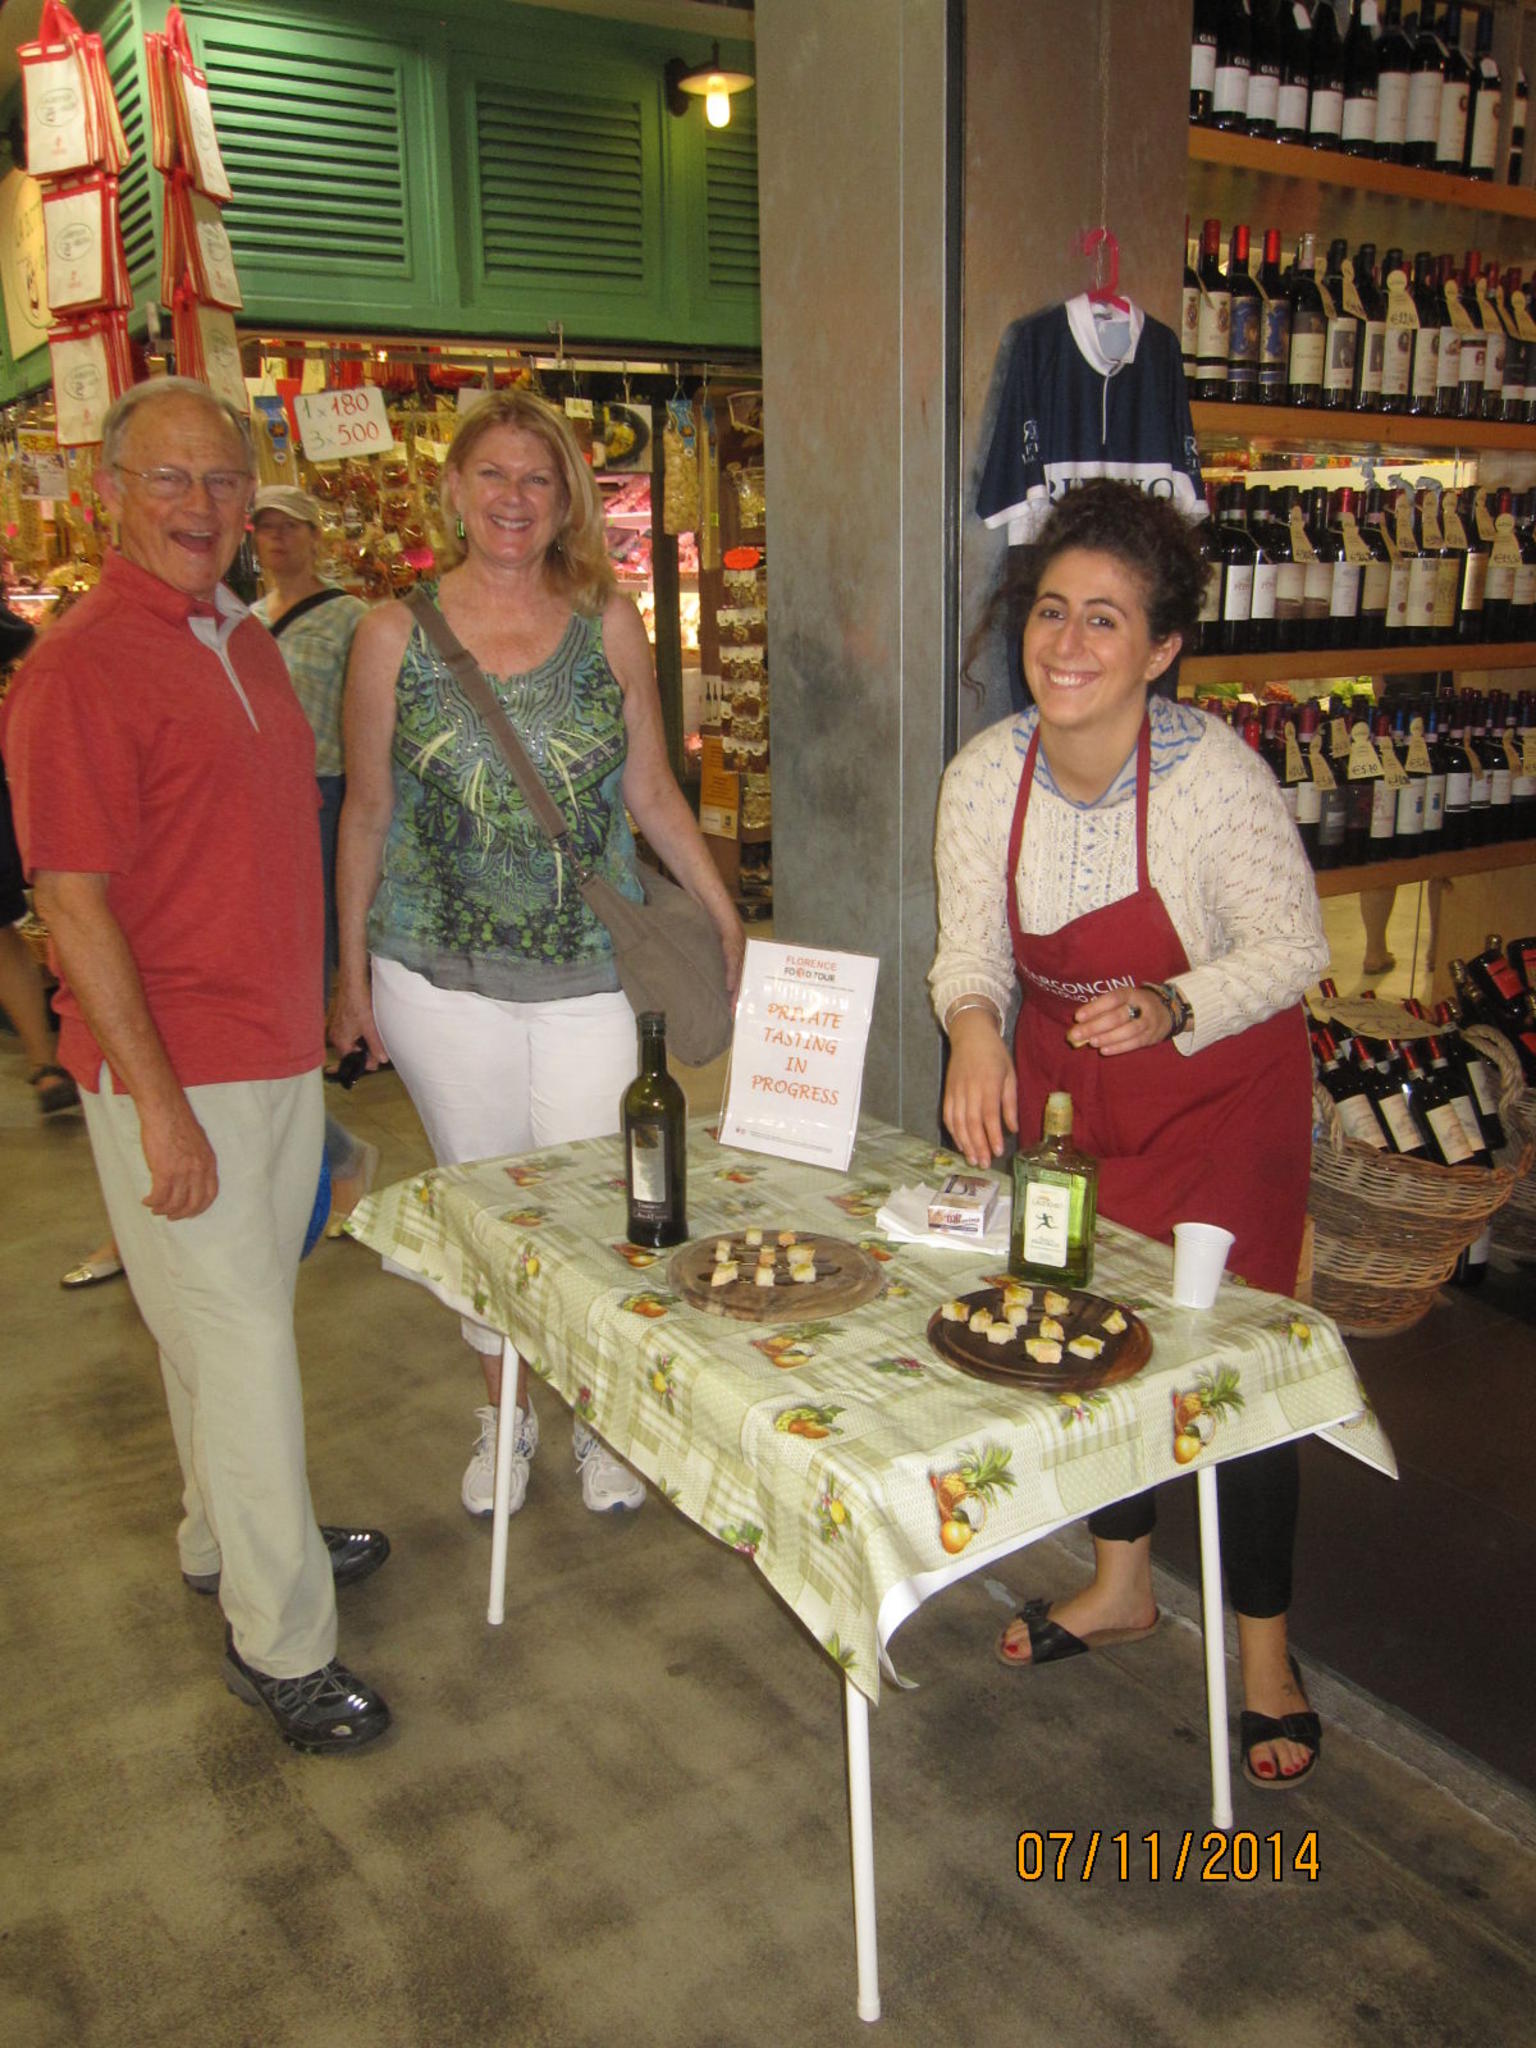 Our private taste testing in the San Lorenzo Central Market in Florence.